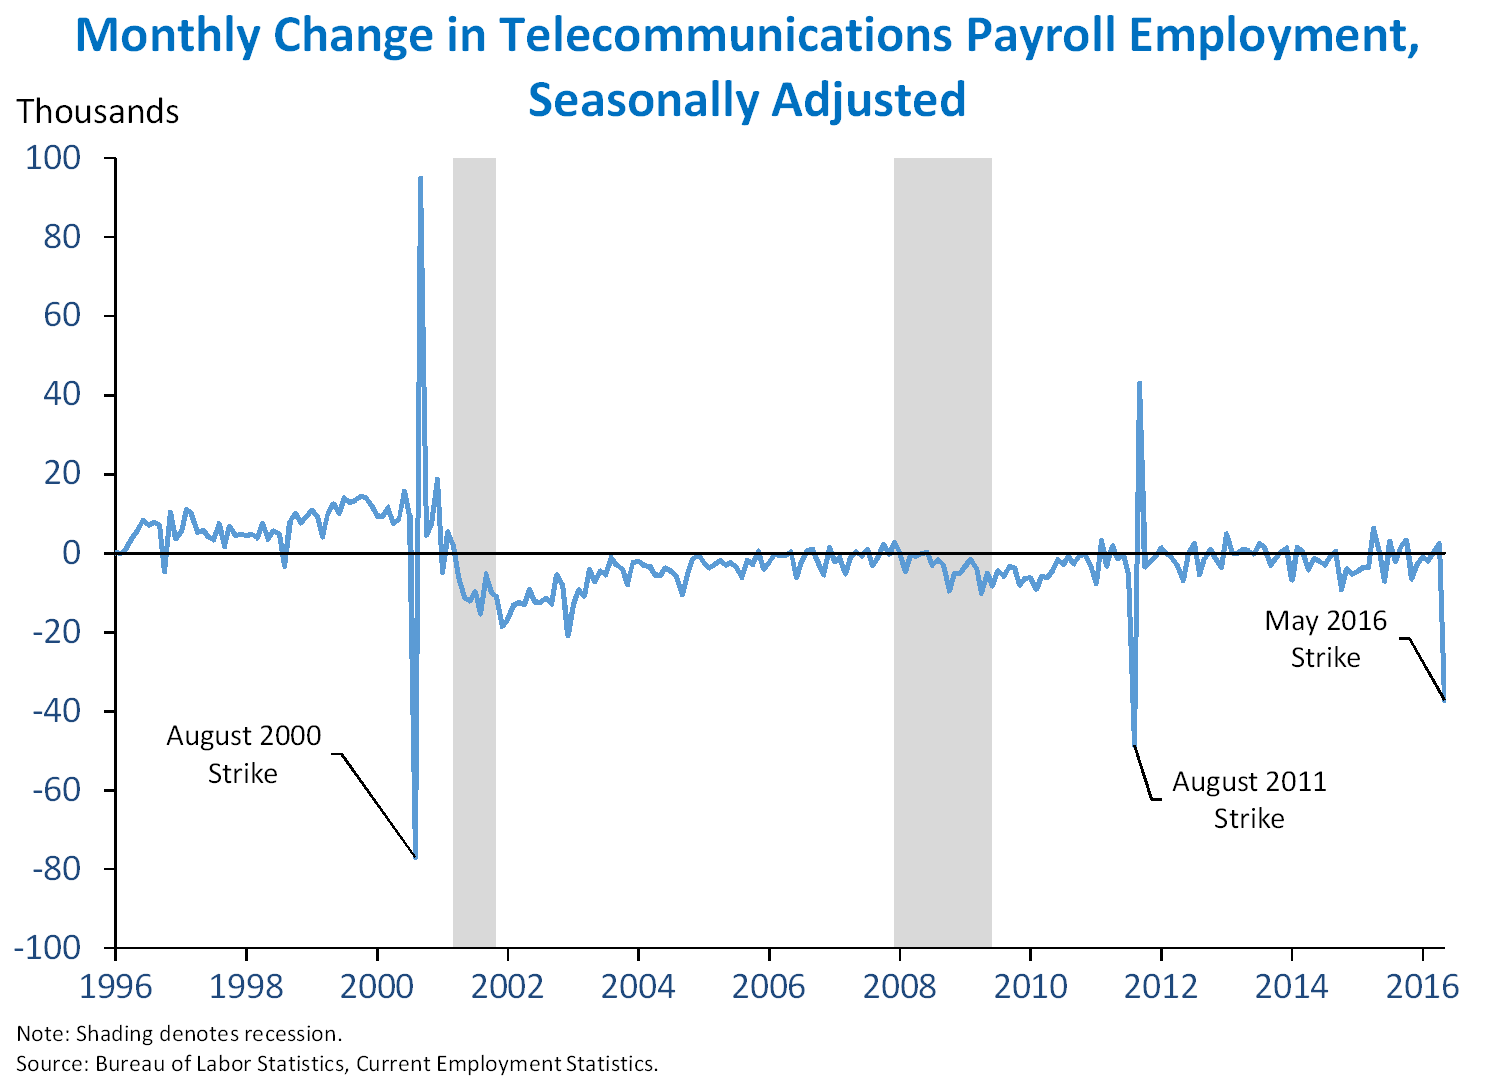 Monthly Change in Telecommunications Payroll Employment, Seasonally Adjusted